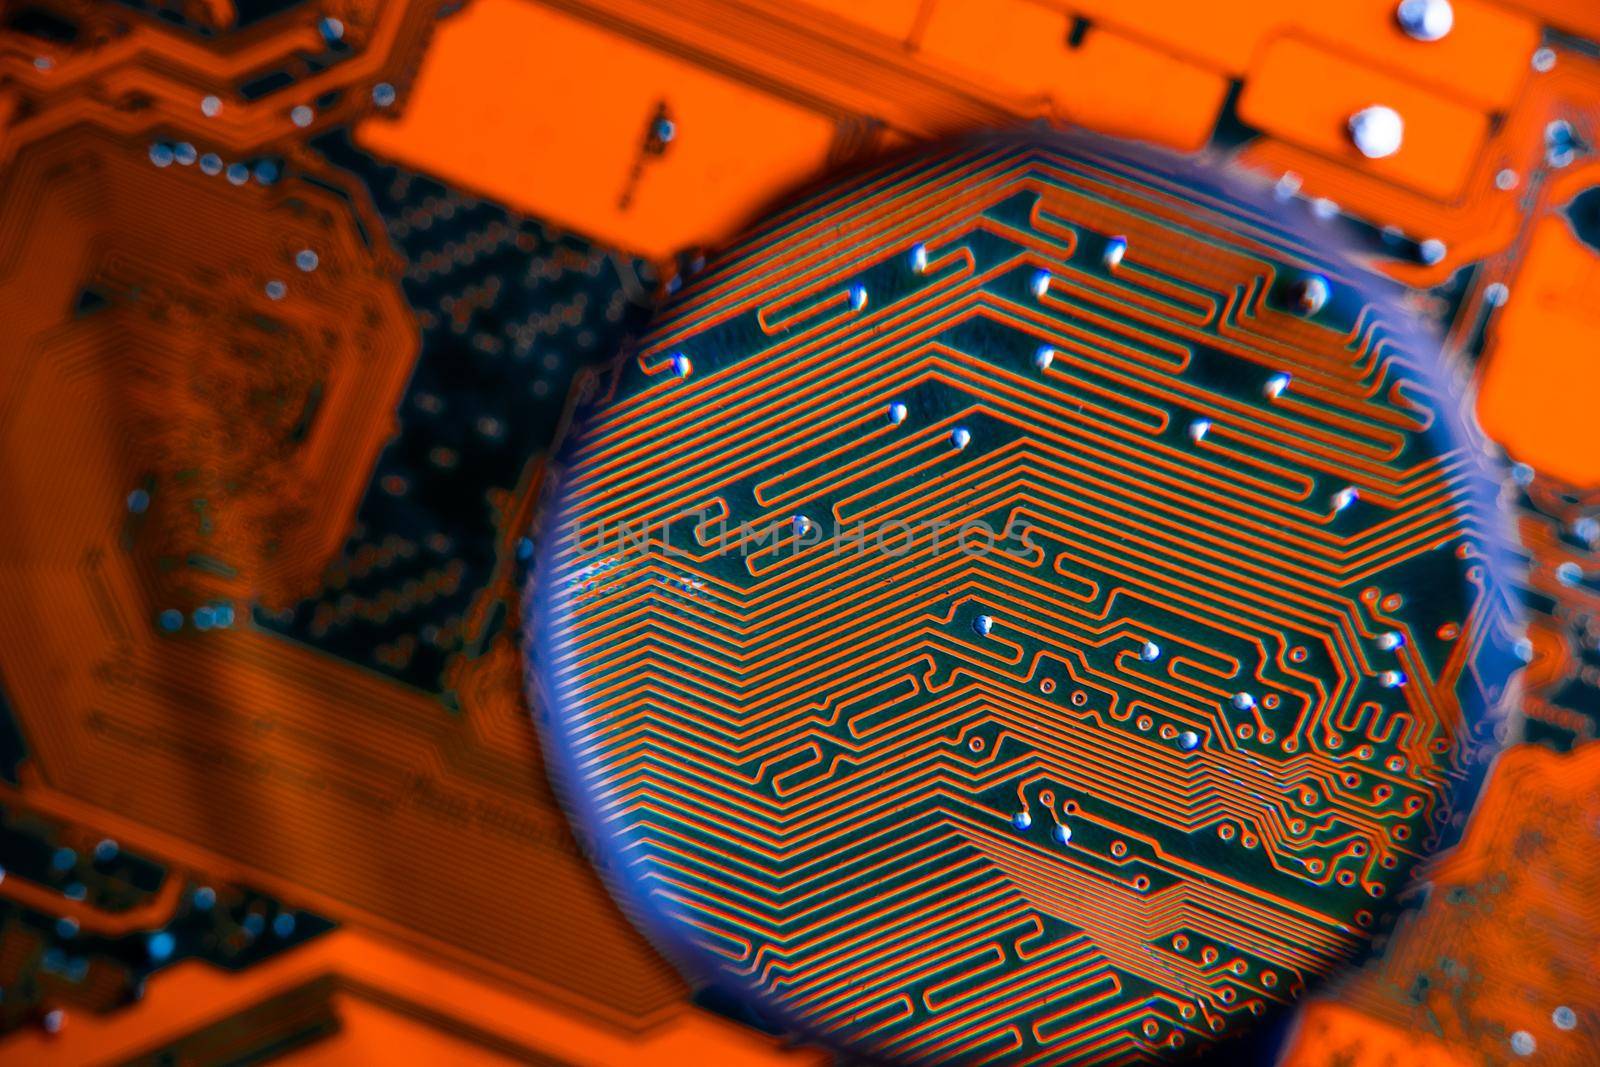 Circuit board of computer motherboard, concept background Computer technology with blue and red colors, for use as a backdrop for presentations. Information Engineering Components and technology.